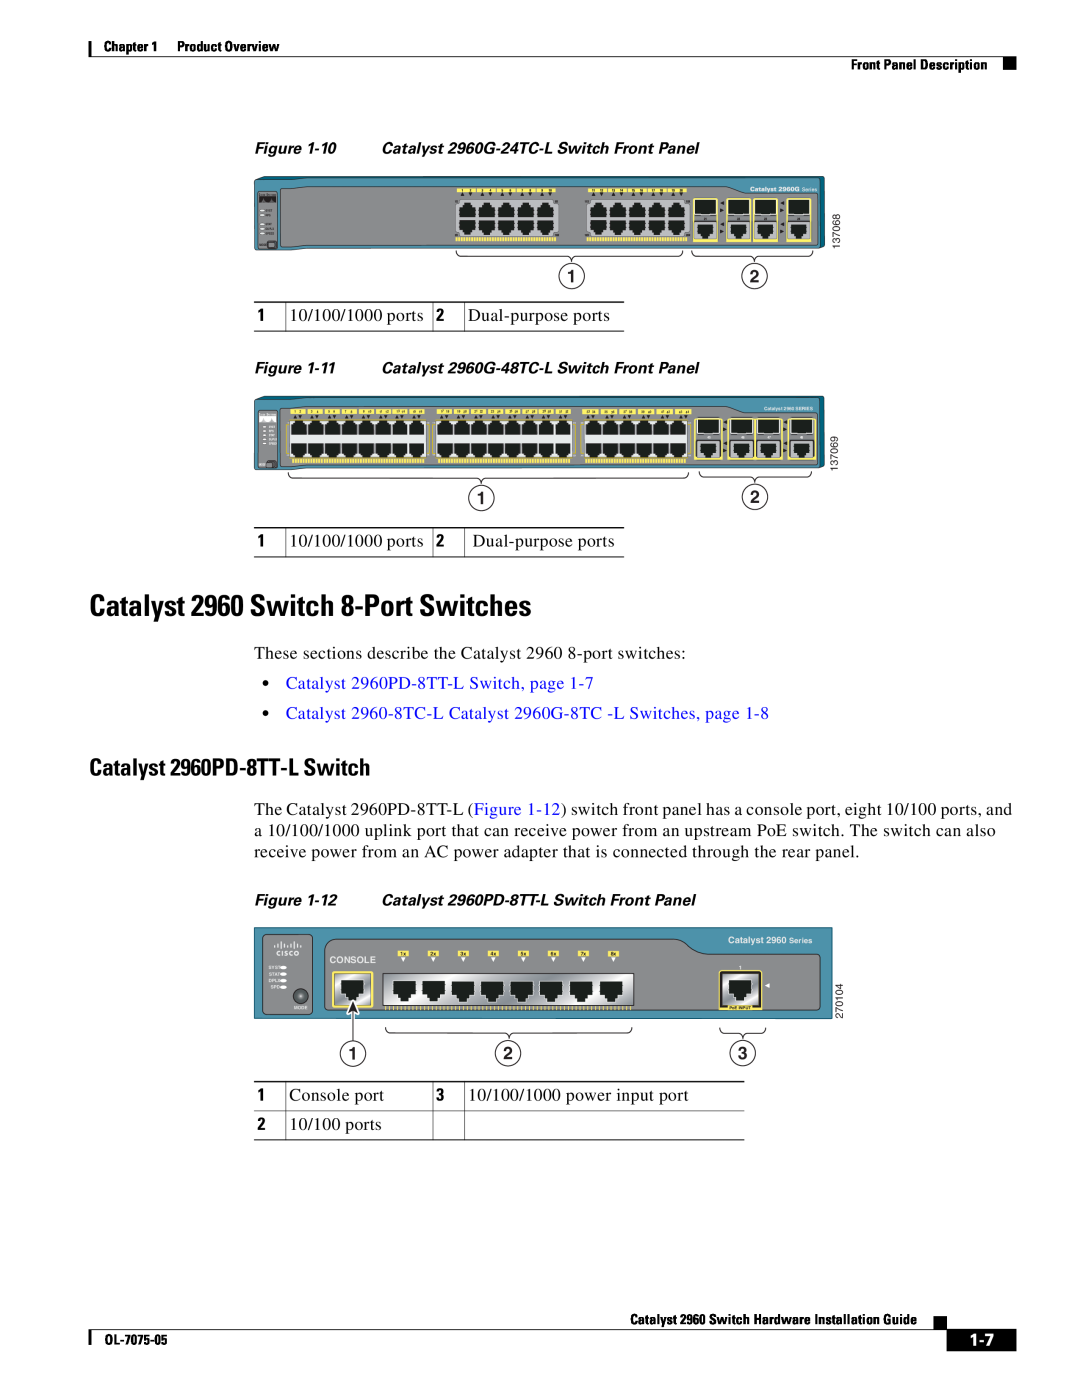 Cisco Systems Catalyst 2960 Switch 8-Port Switches, Catalyst 2960PD-8TT-L Switch, 1 10/100/1000 ports, Console port 